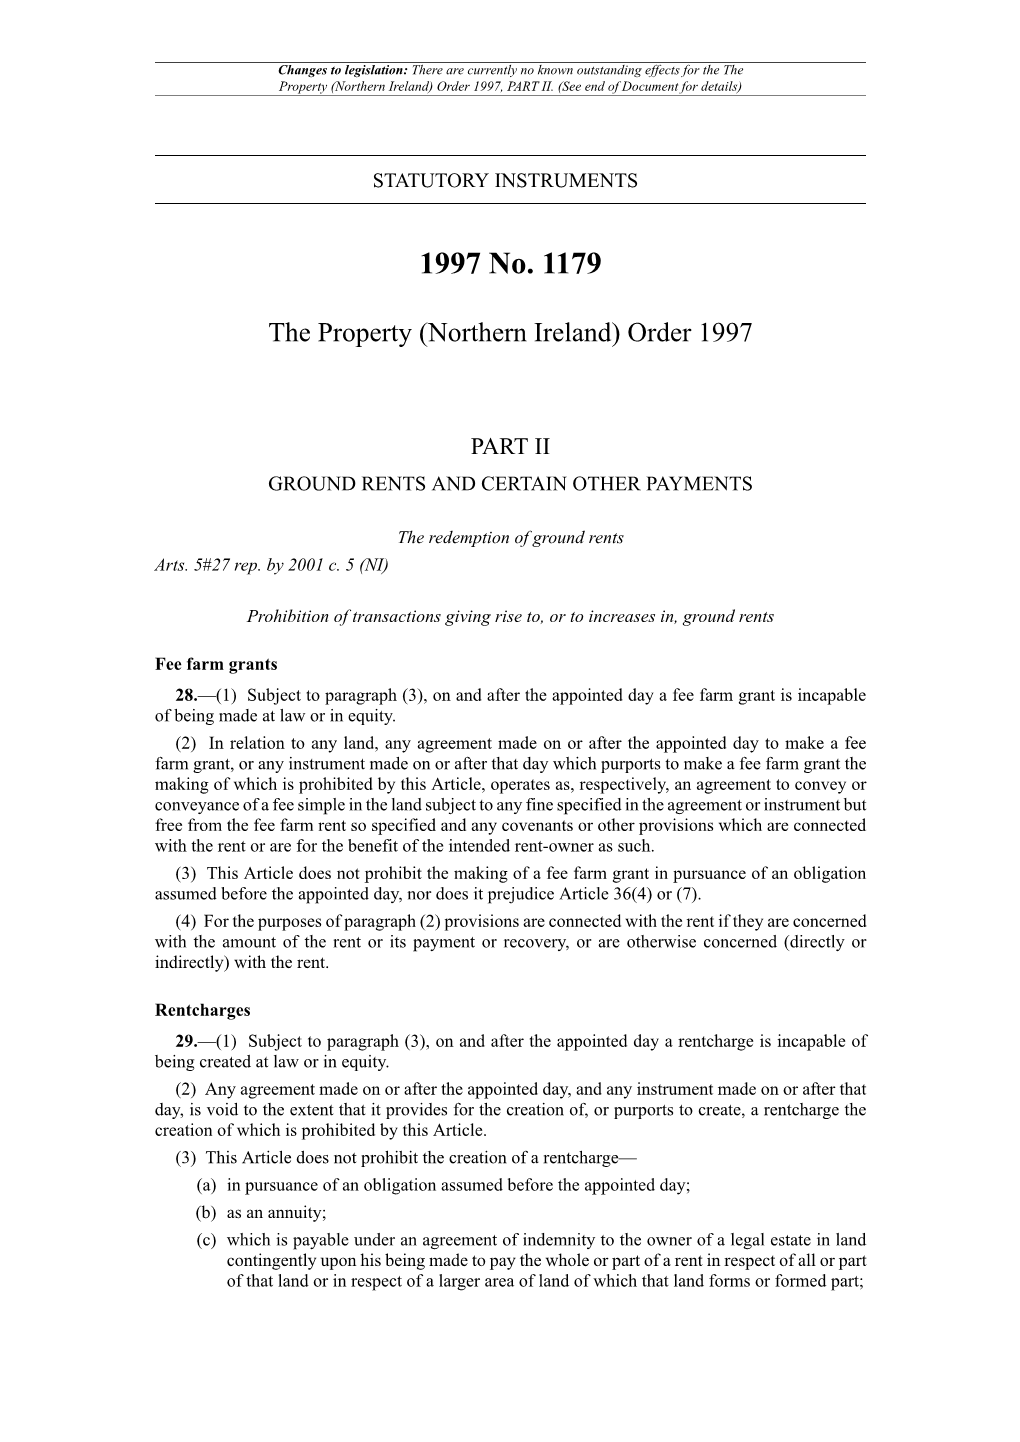 The Property (Northern Ireland) Order 1997, PART II